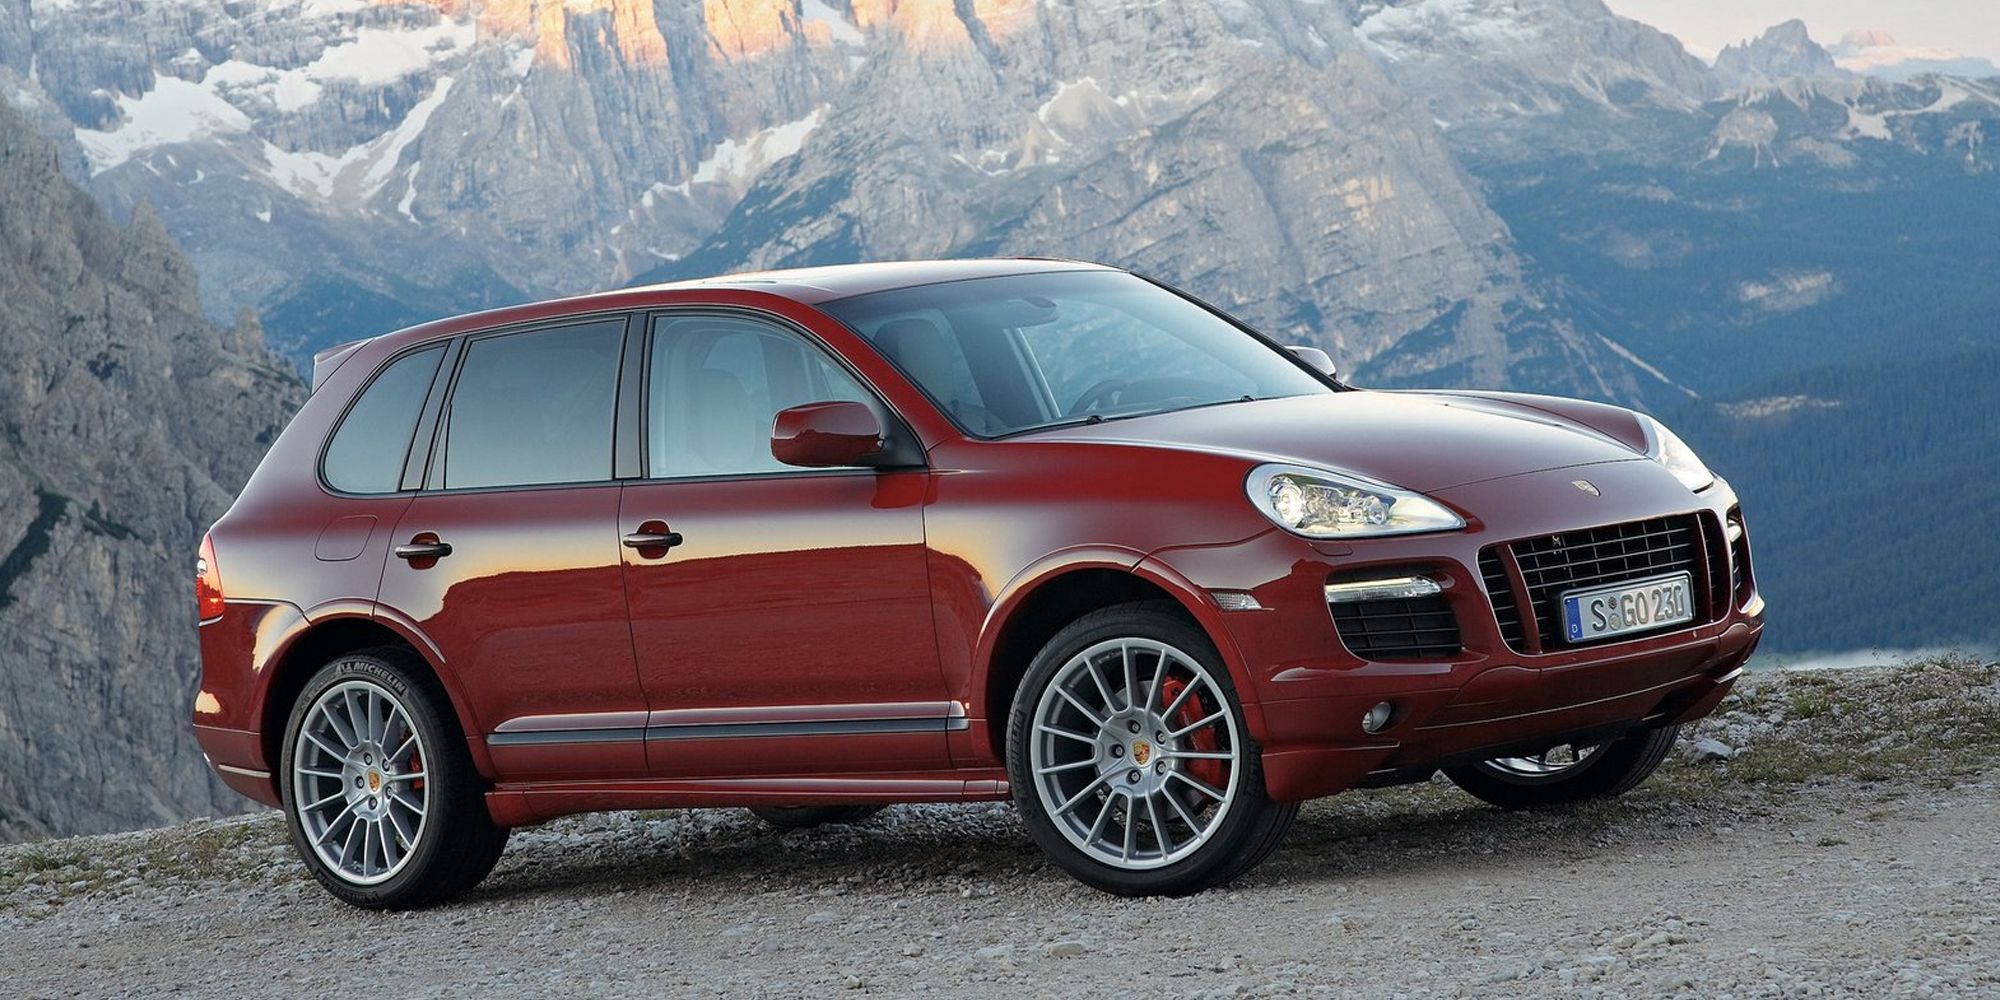 Front 3/4 view of the Cayenne GTS